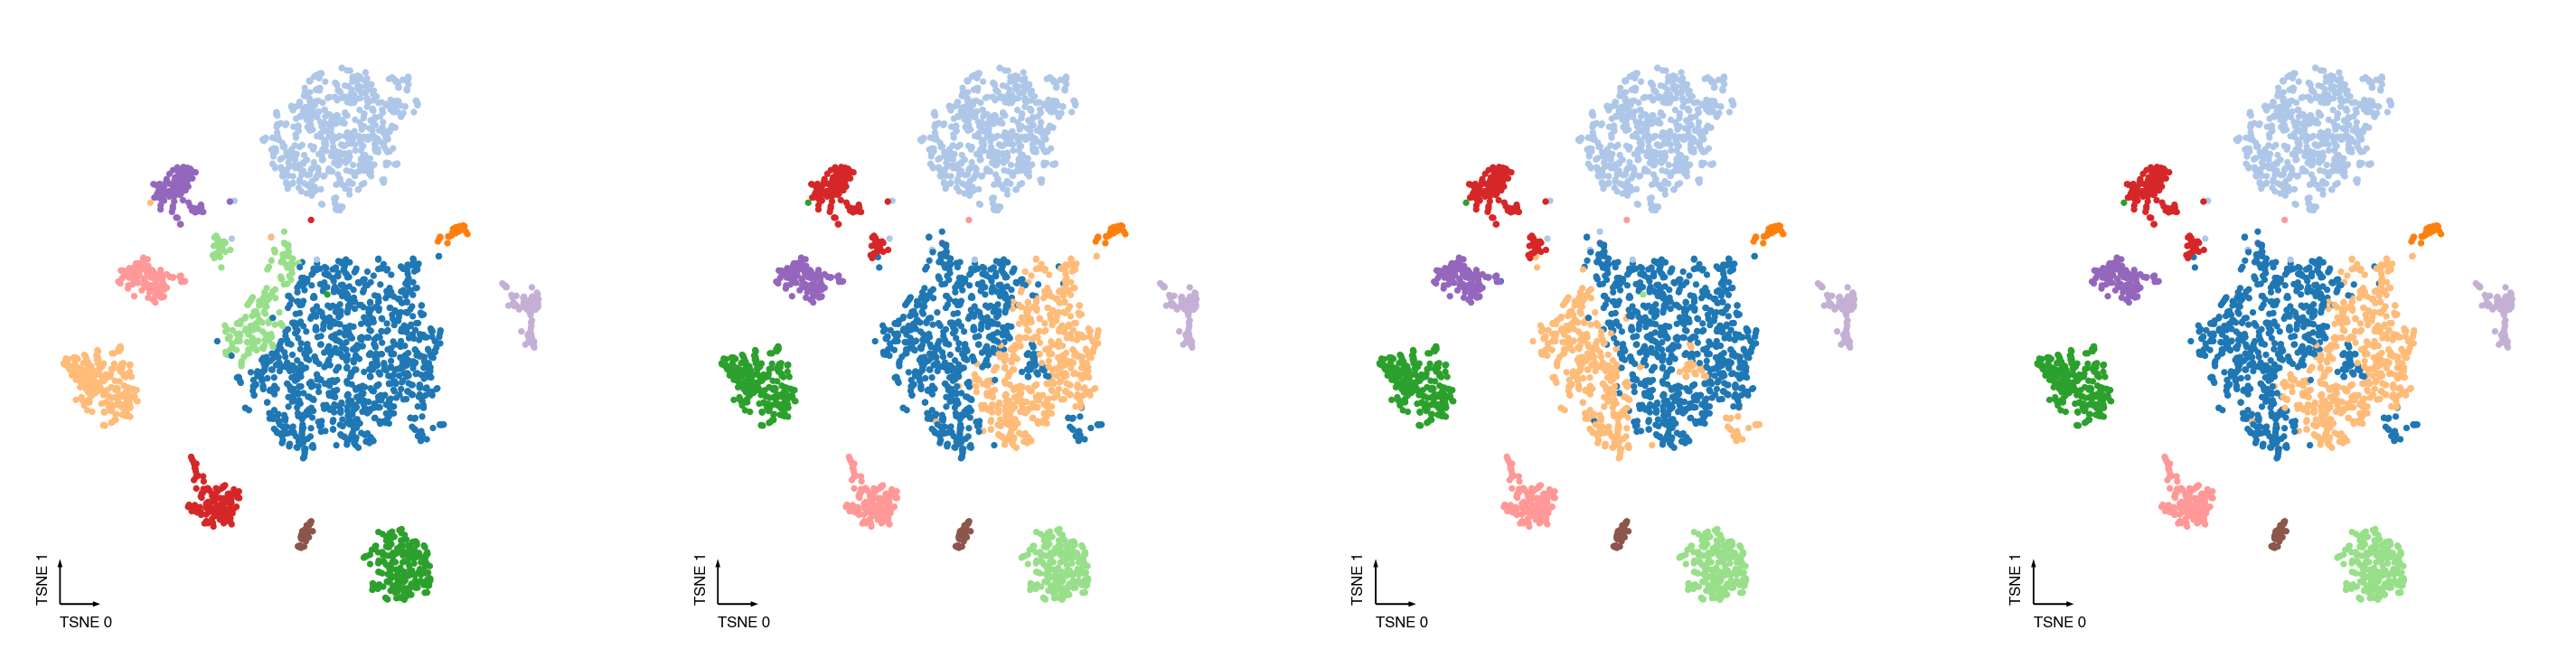 ../../../_images/03-Clustering_12_0.png